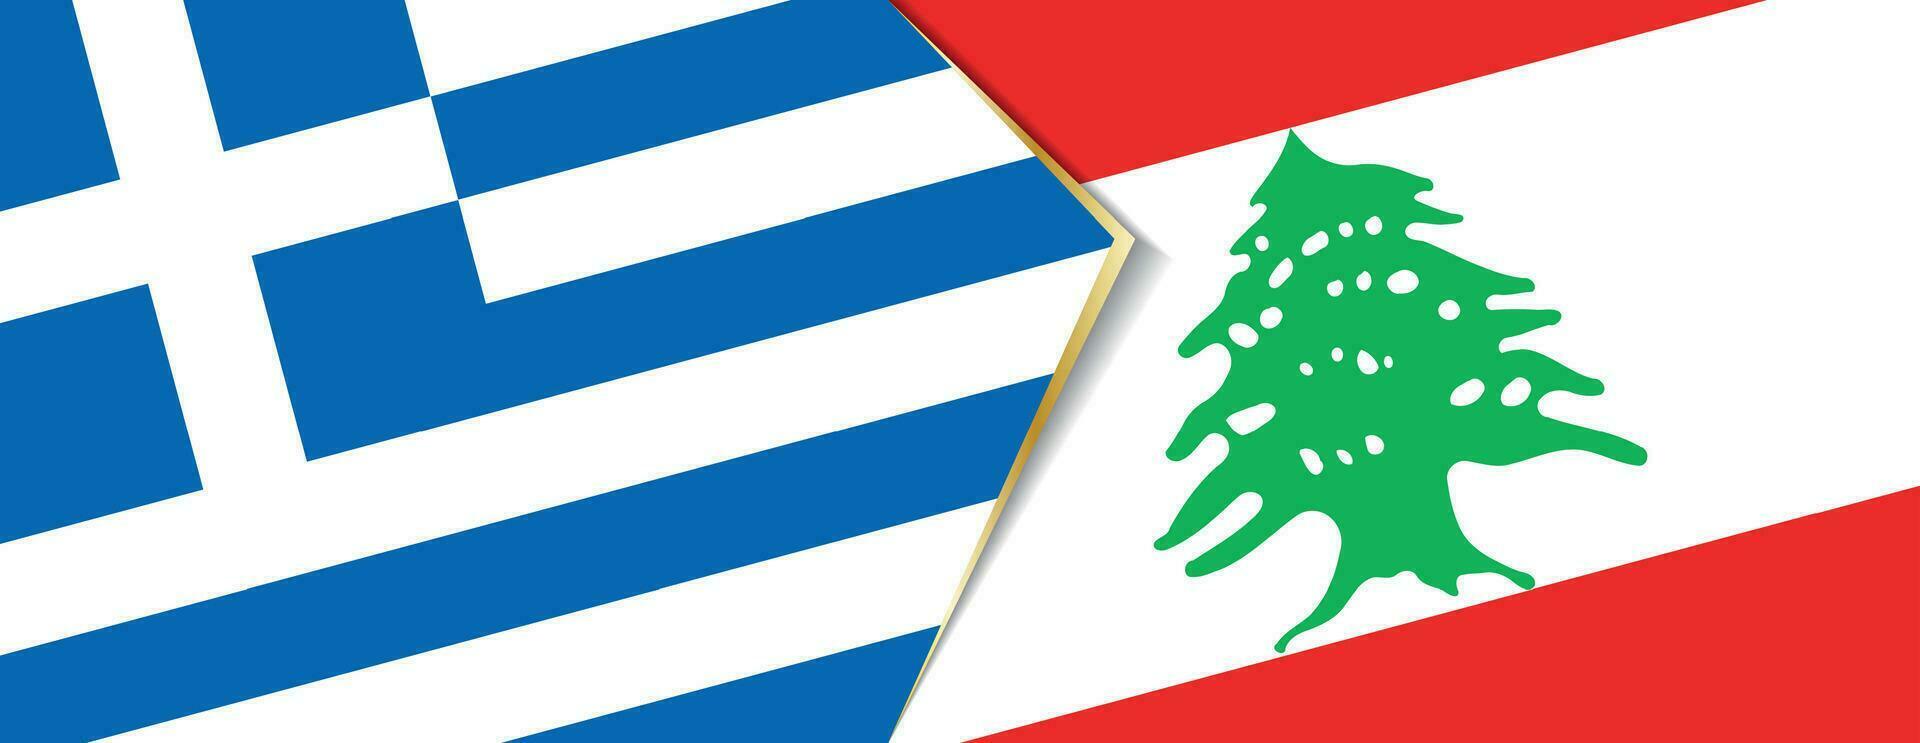 Greece and Lebanon flags, two vector flags.